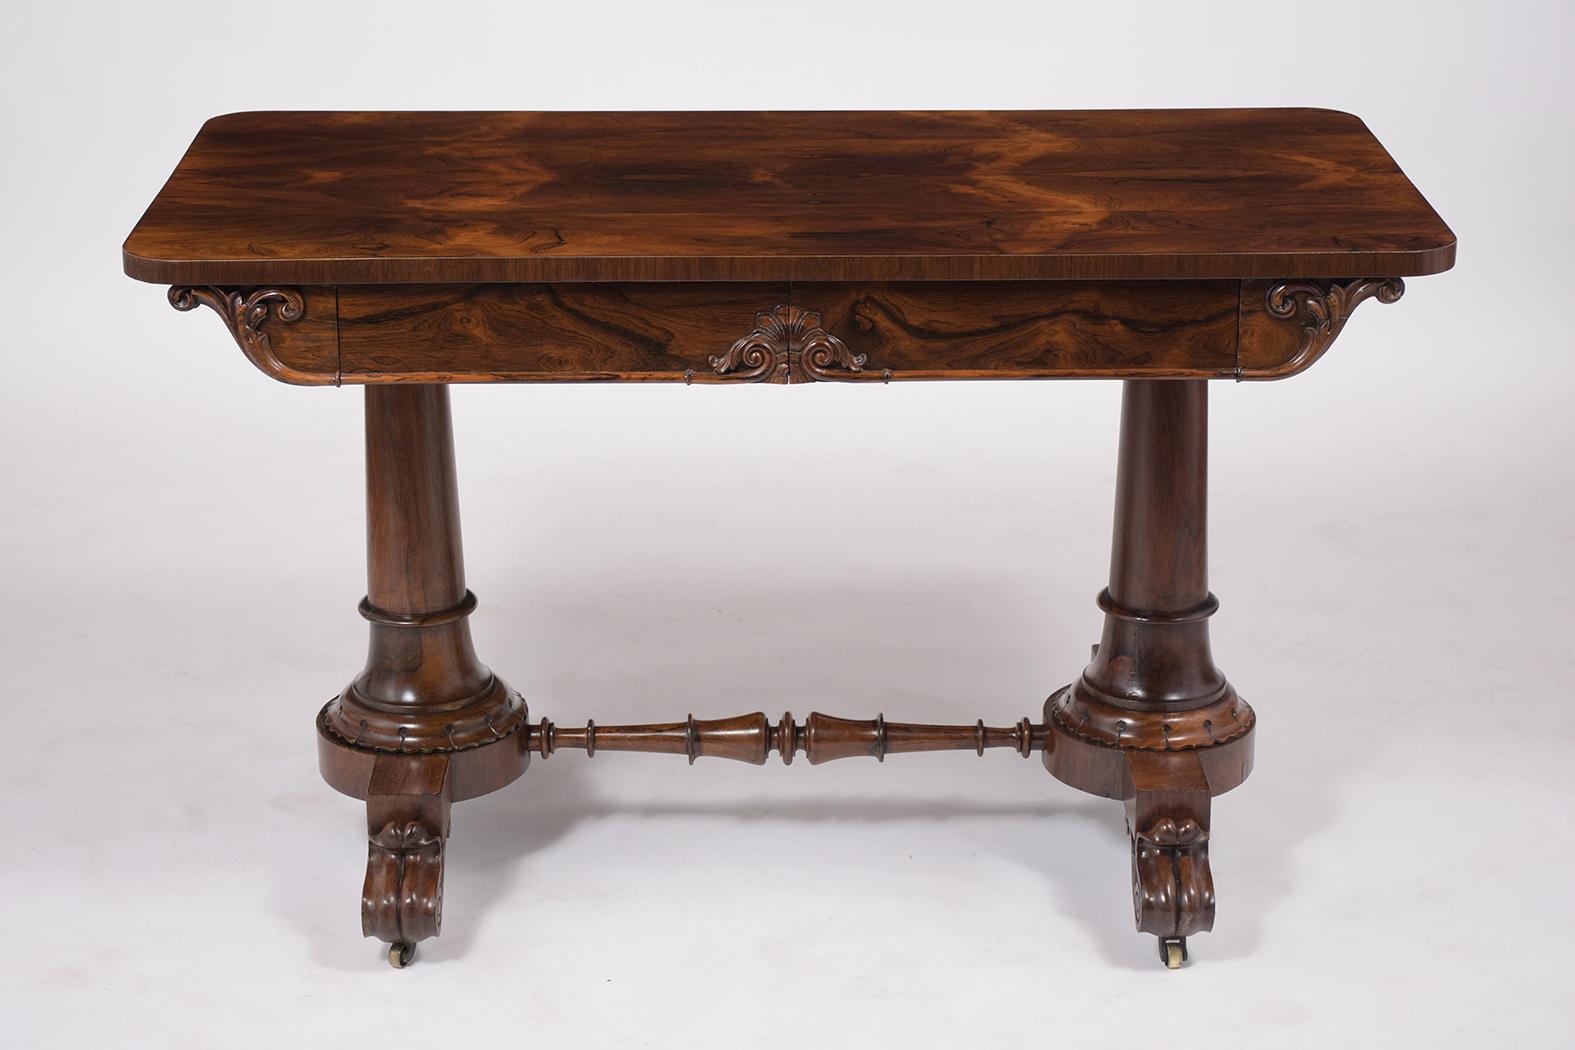 An extraordinary antique empire desk hand-crafted out of beautiful rosewood and professionally restored by our team of expert craftsmen. This writing table features a rectangular wooden top two drawers with a carved shell in the middle and molding